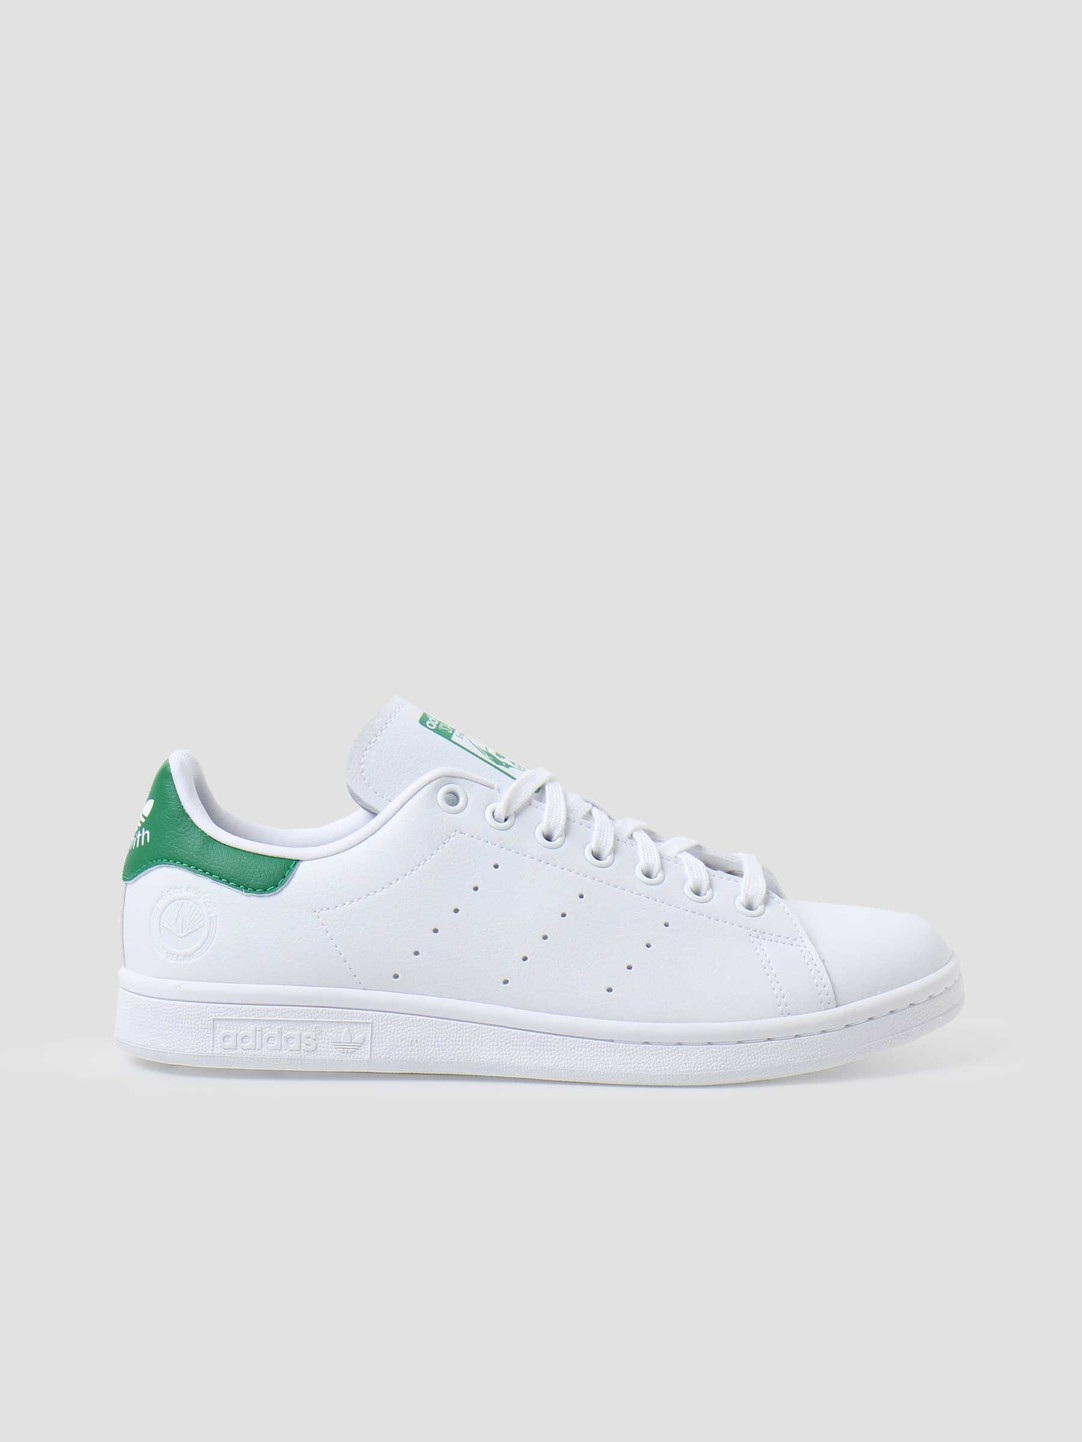 stan smith green and white